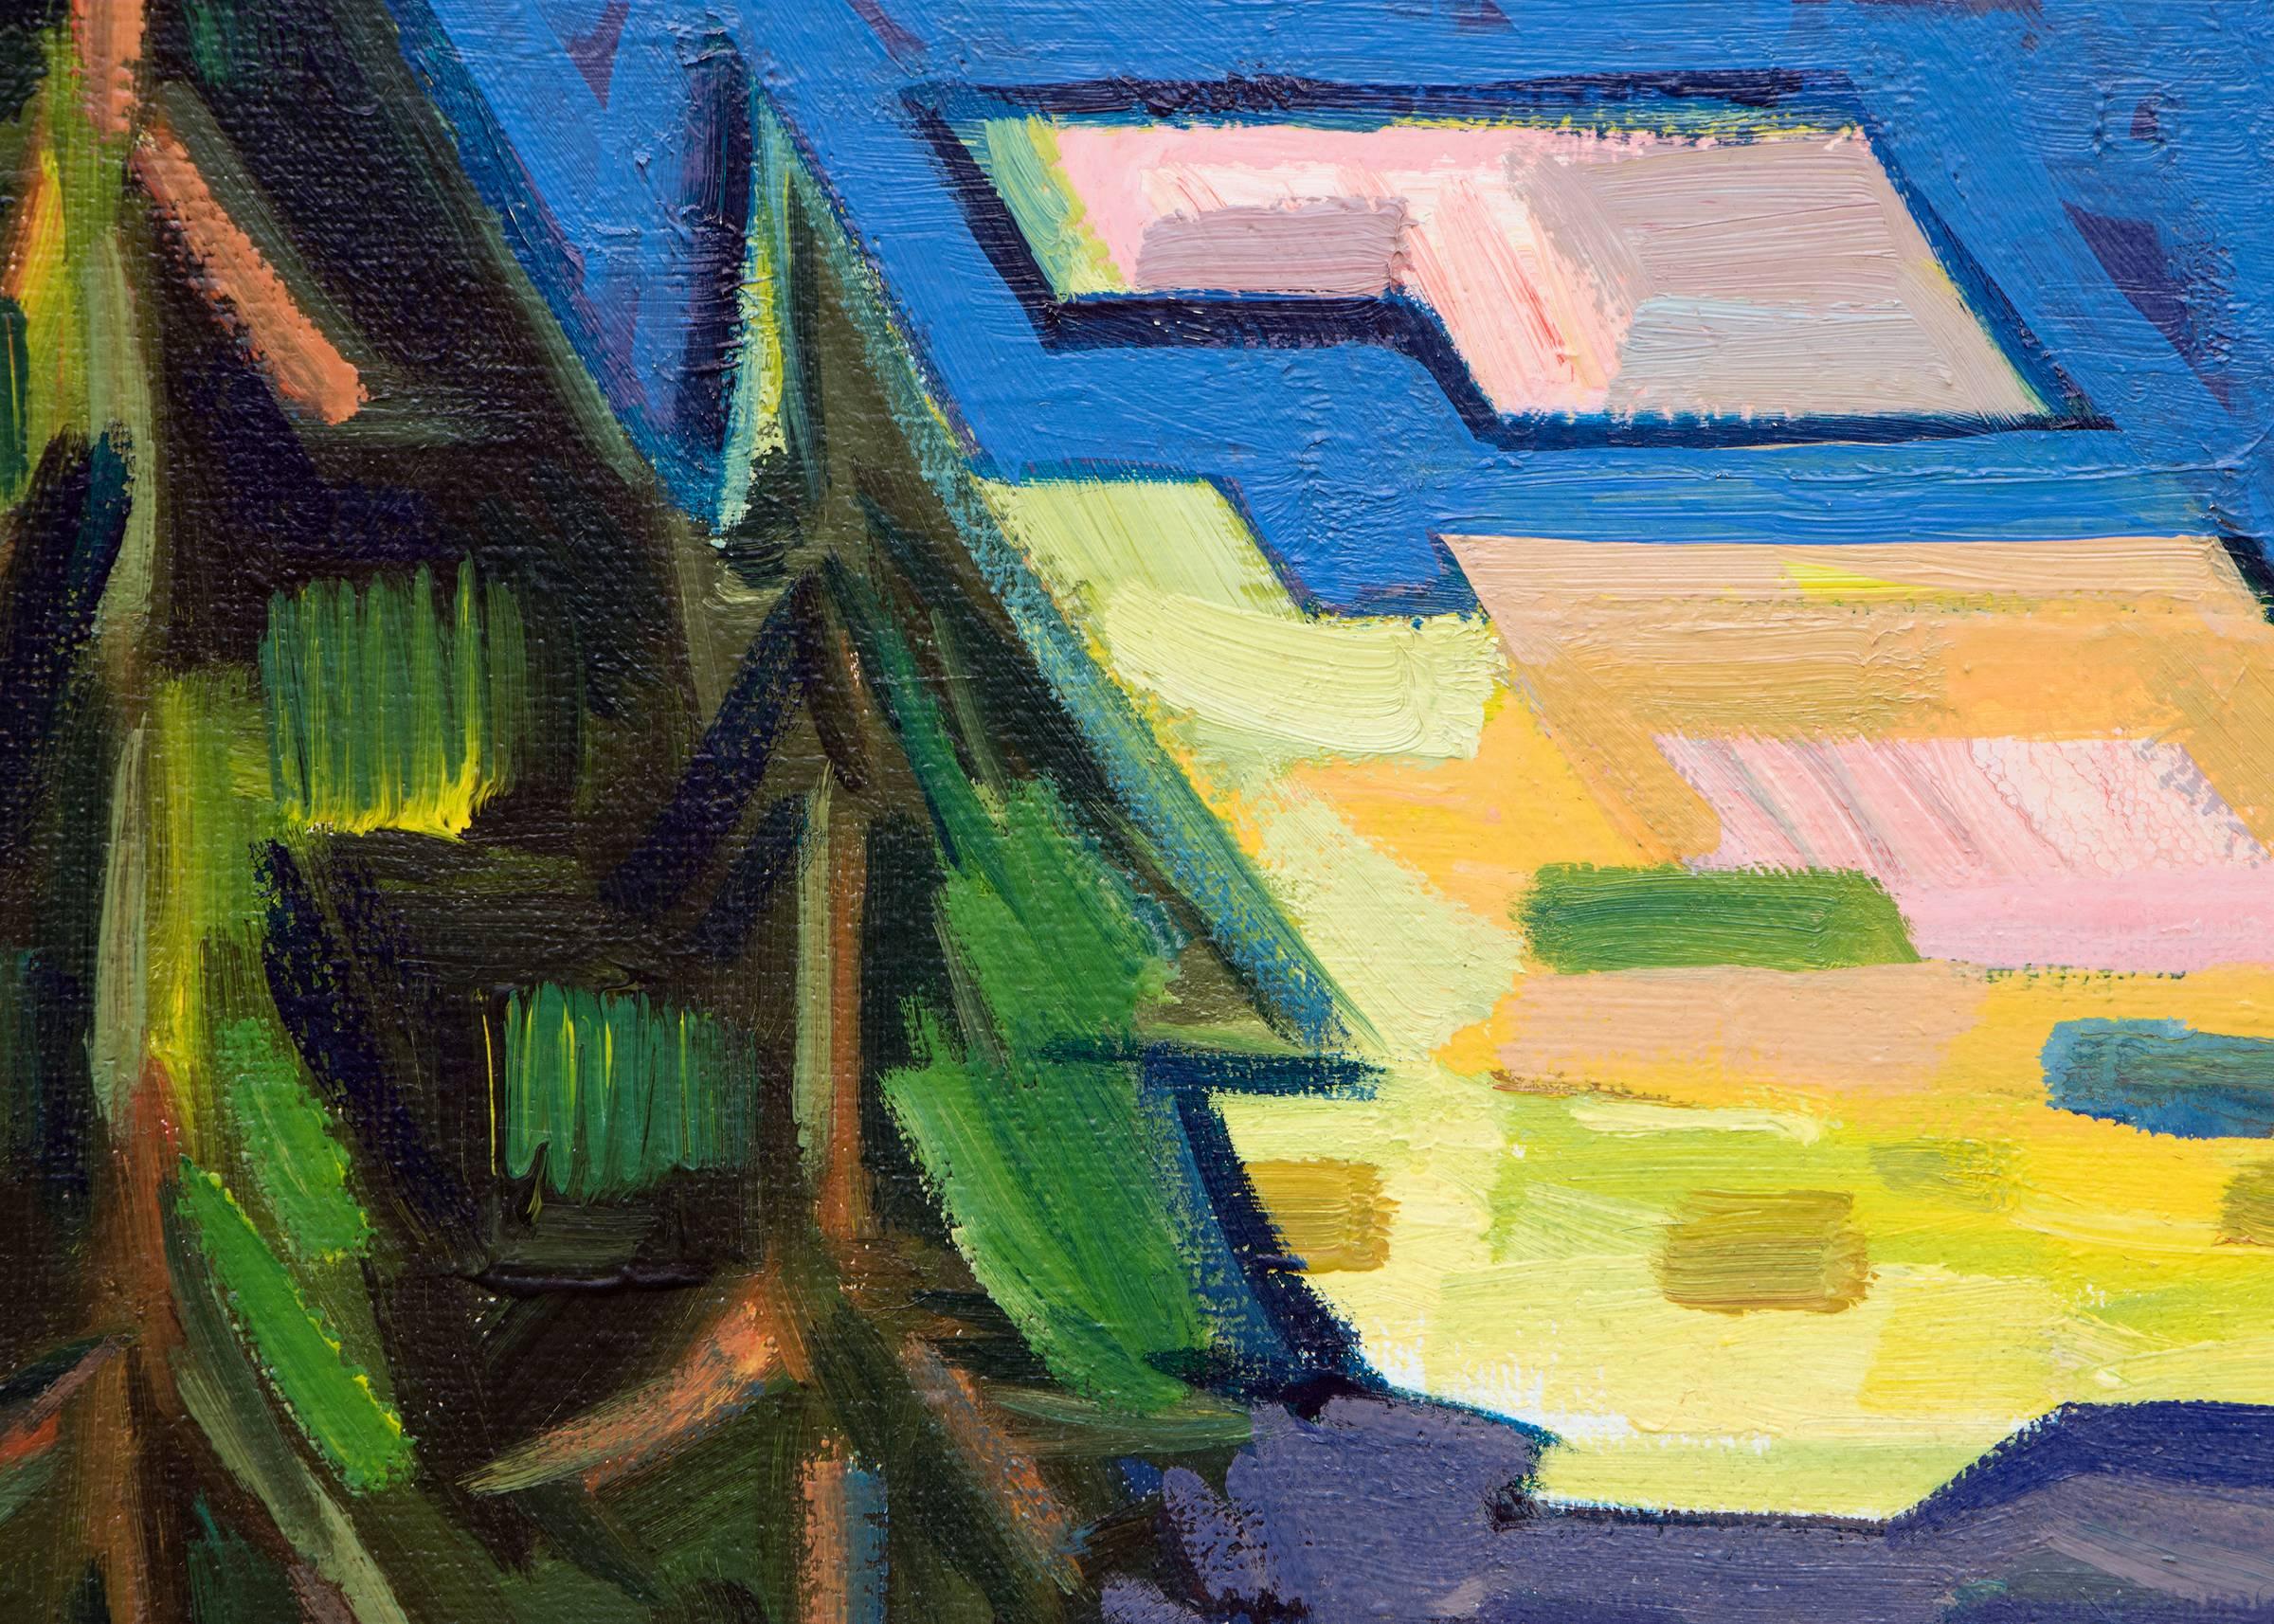 An abstracted view of a mountain lake (most likely from Colorado). Housed in a custom hardwood frame.  Outer dimensions measure 29.75 x 23.5 x 2 inches; image dimensions measure 24 x 18 inches. 

About the artist: 
Educated by the foremost artists